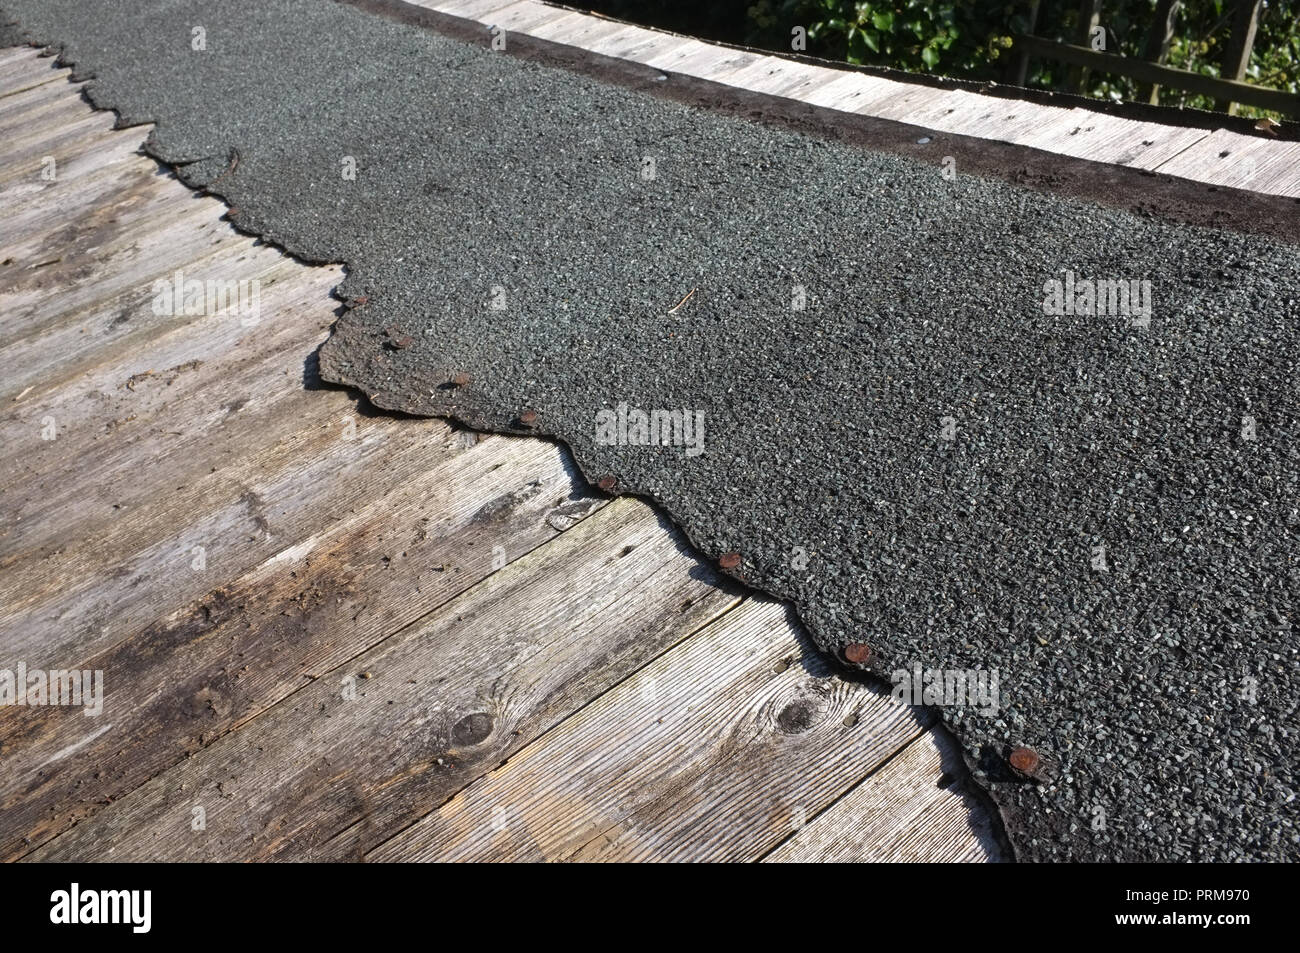 A worn-out, damaged garden shed roof, in need of repair. Stock Photo